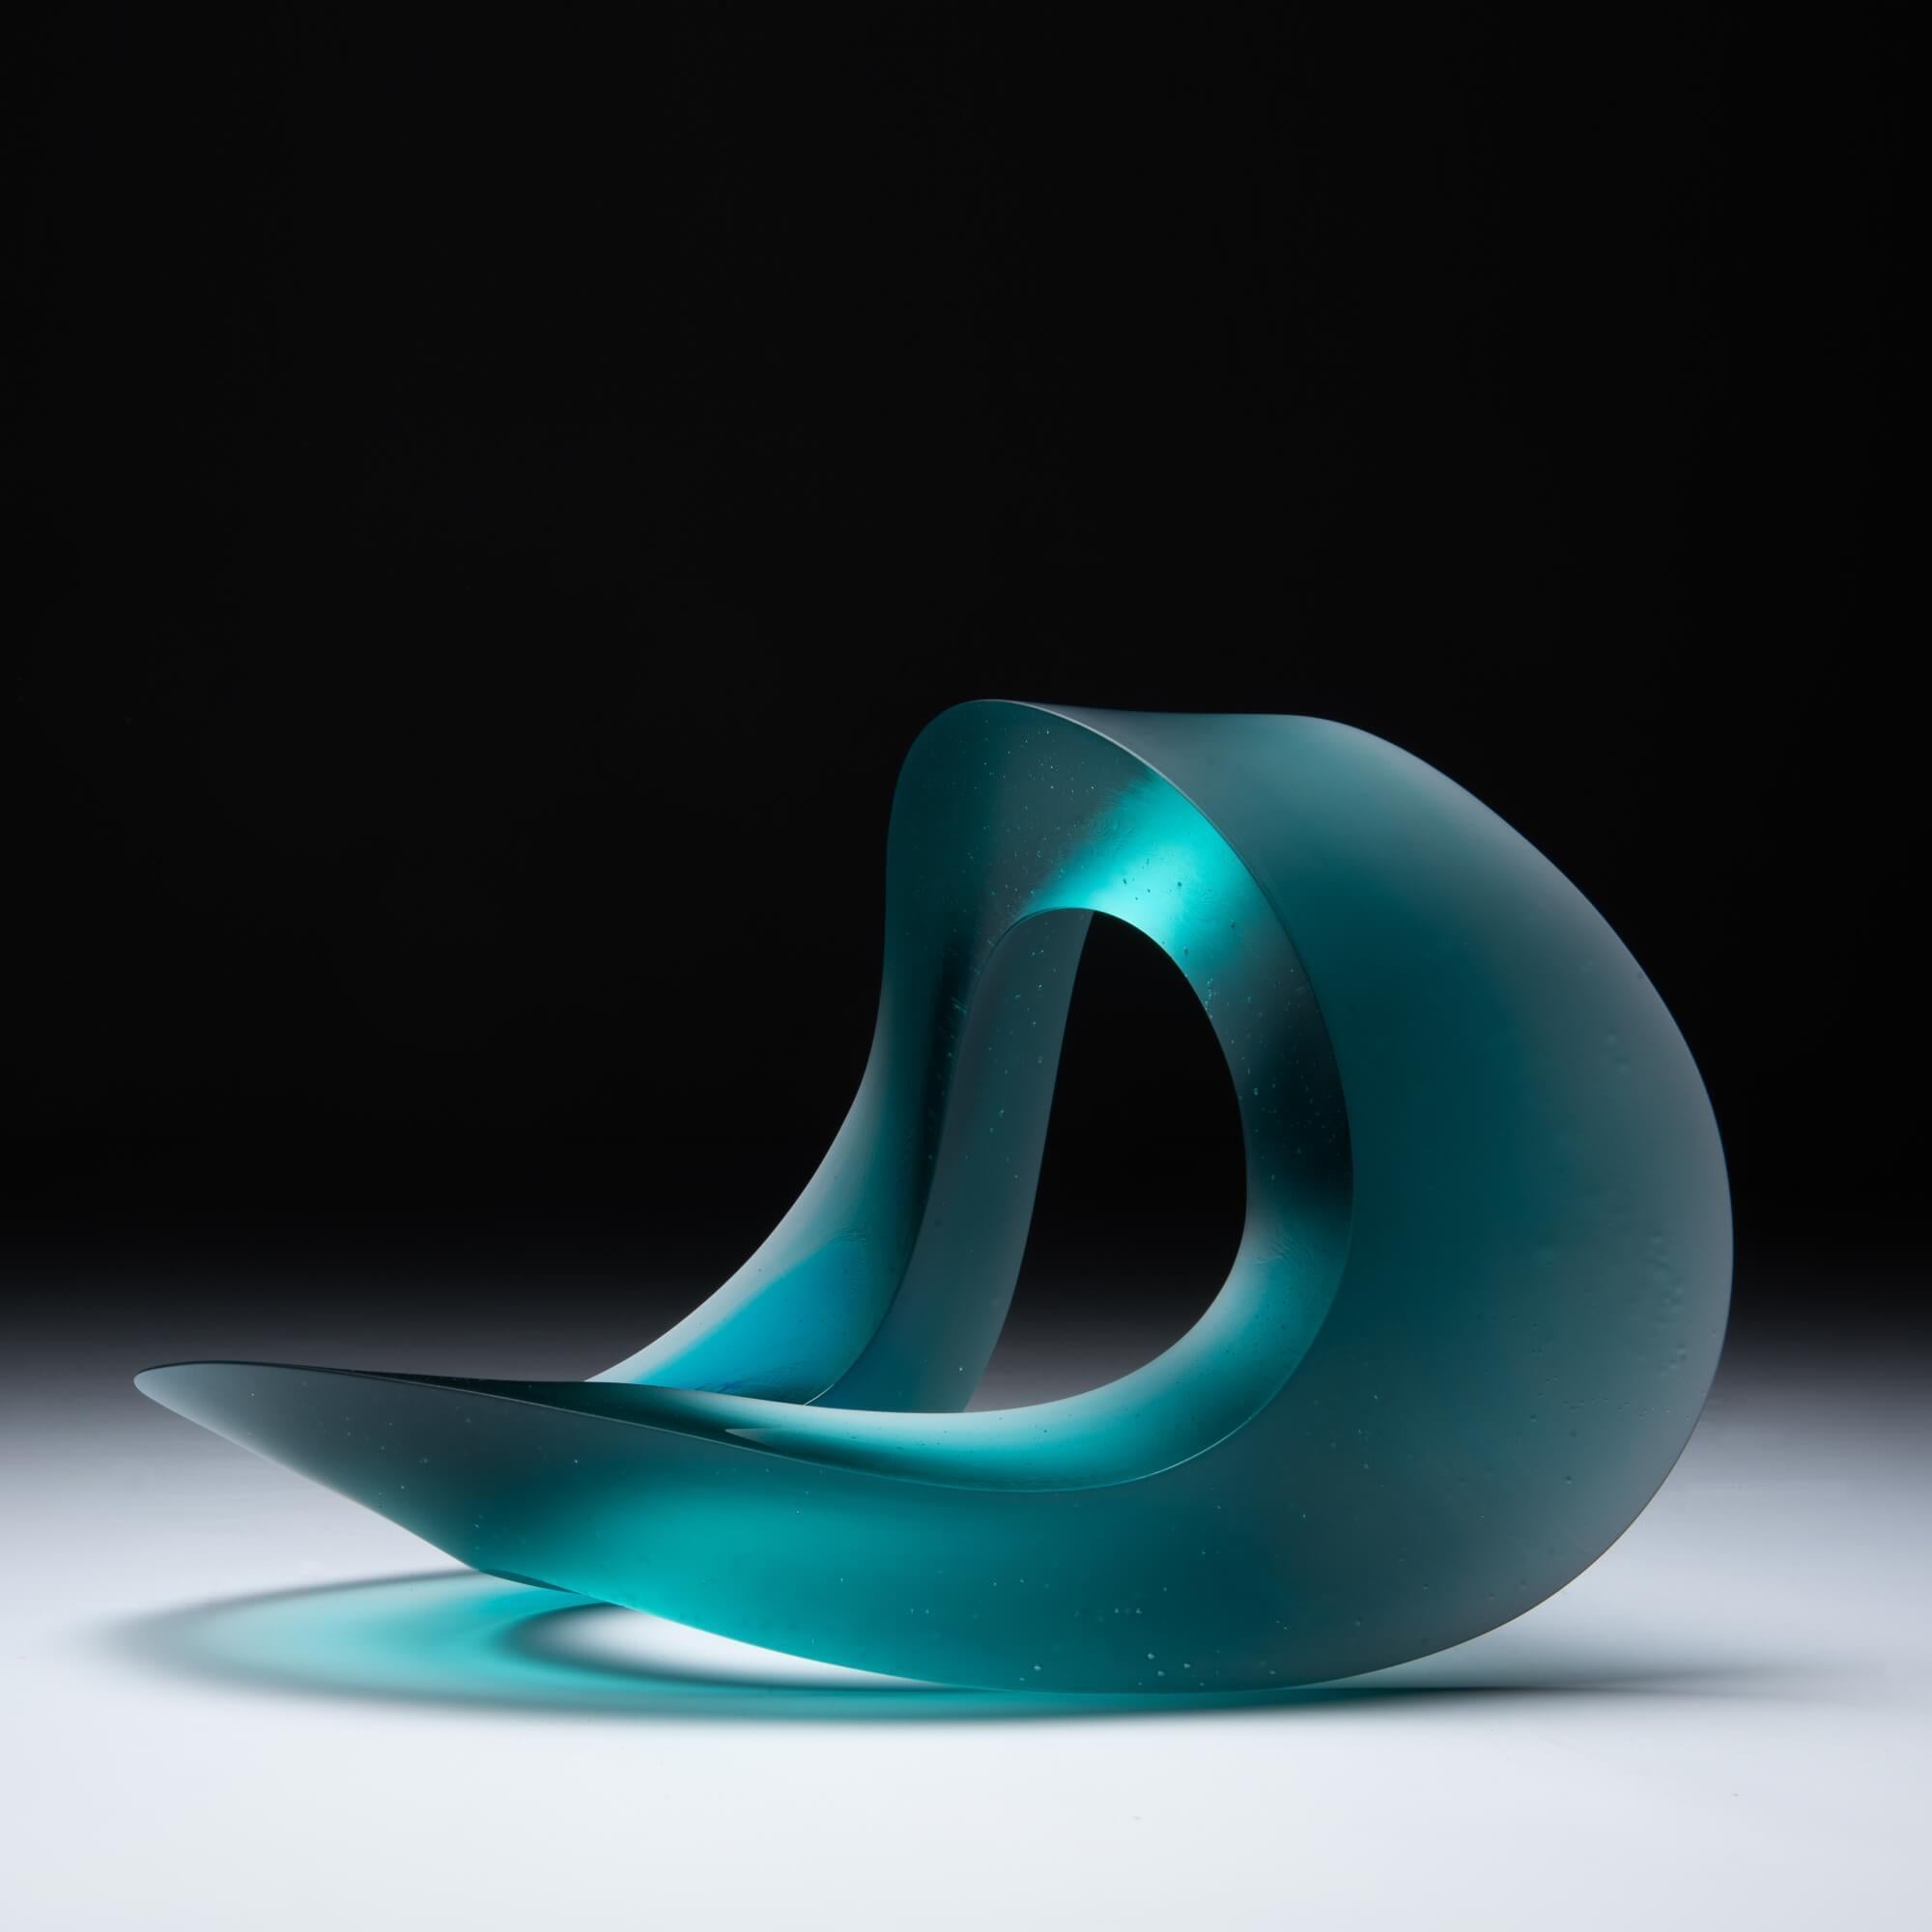 Created from solid cast glass, Heike Brachlow’s intriguing sculpture Halycon is based on a concept called D-form, a three-dimensional form created by joining the edges of two flat shapes with the same perimeter length. Brachlow has been exploring